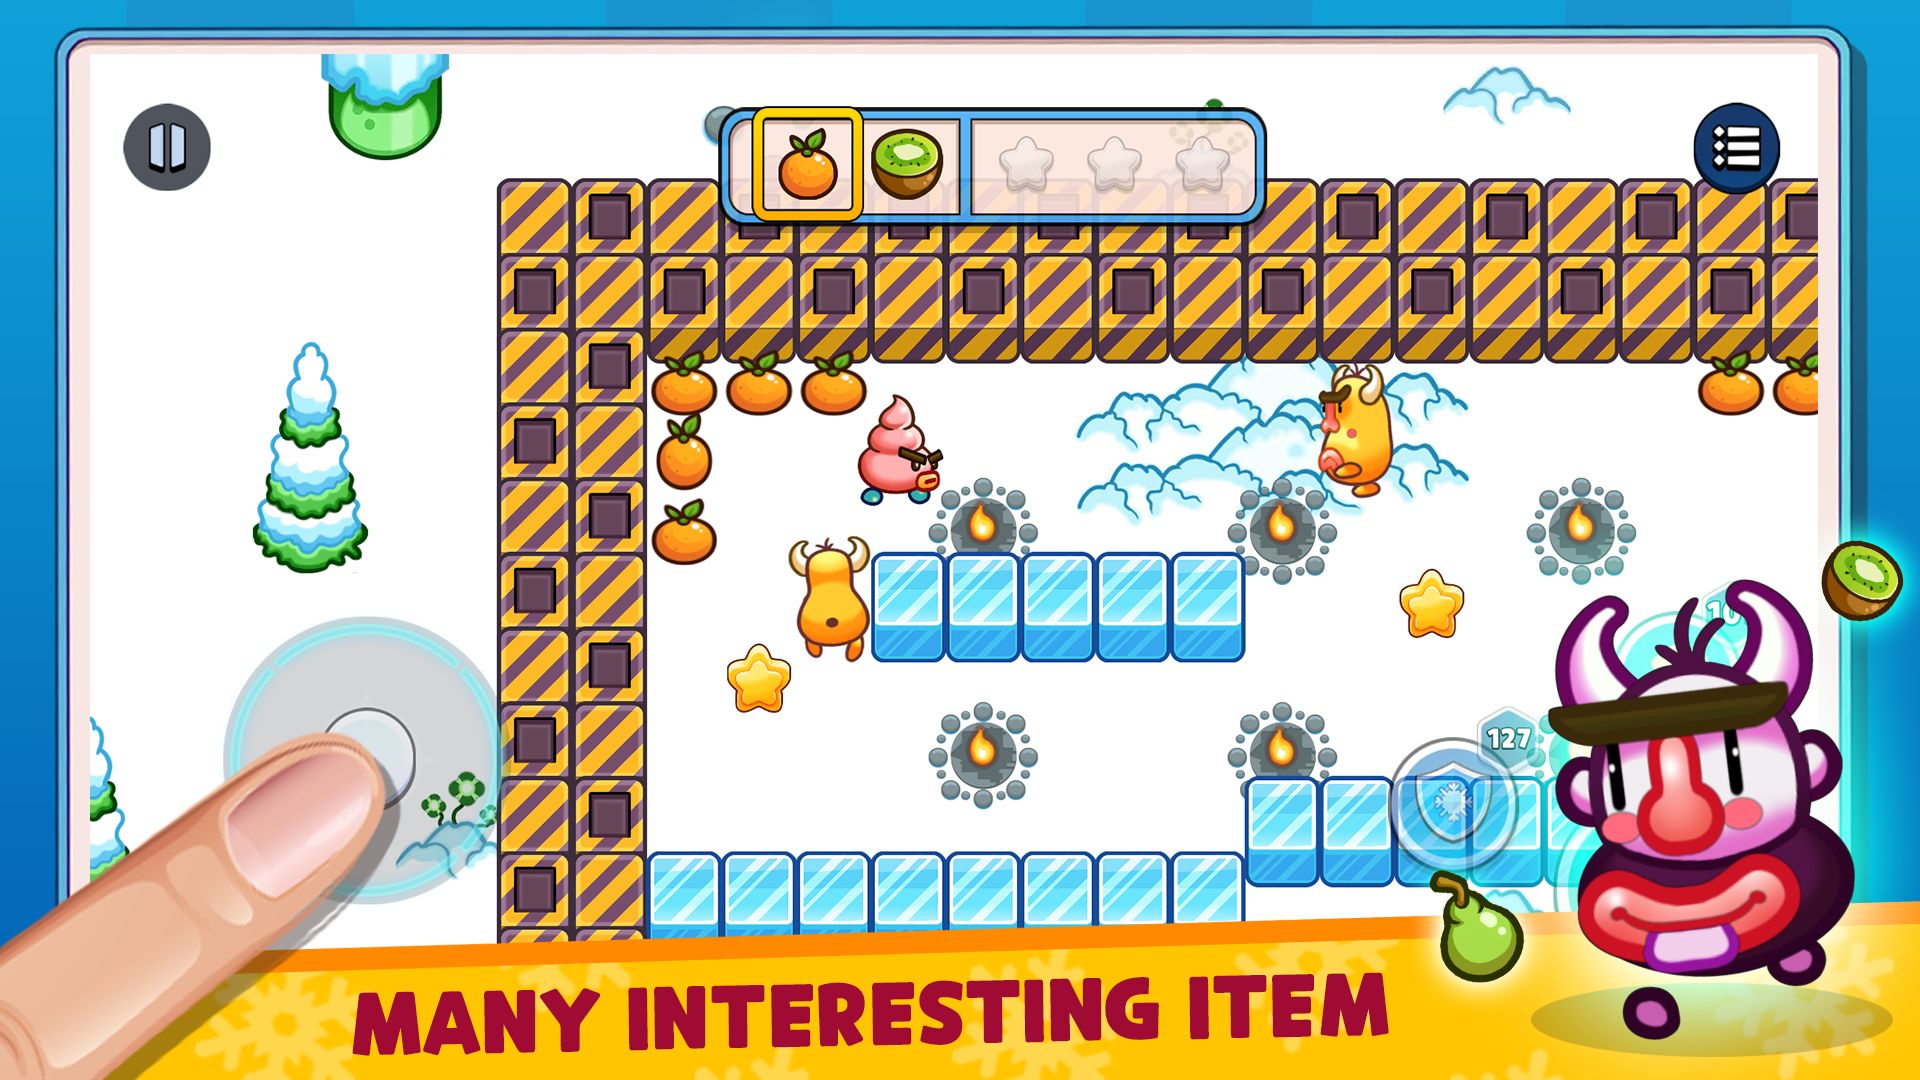 Fruit Ice Cream 2 - Ice cream war Maze Game for Android